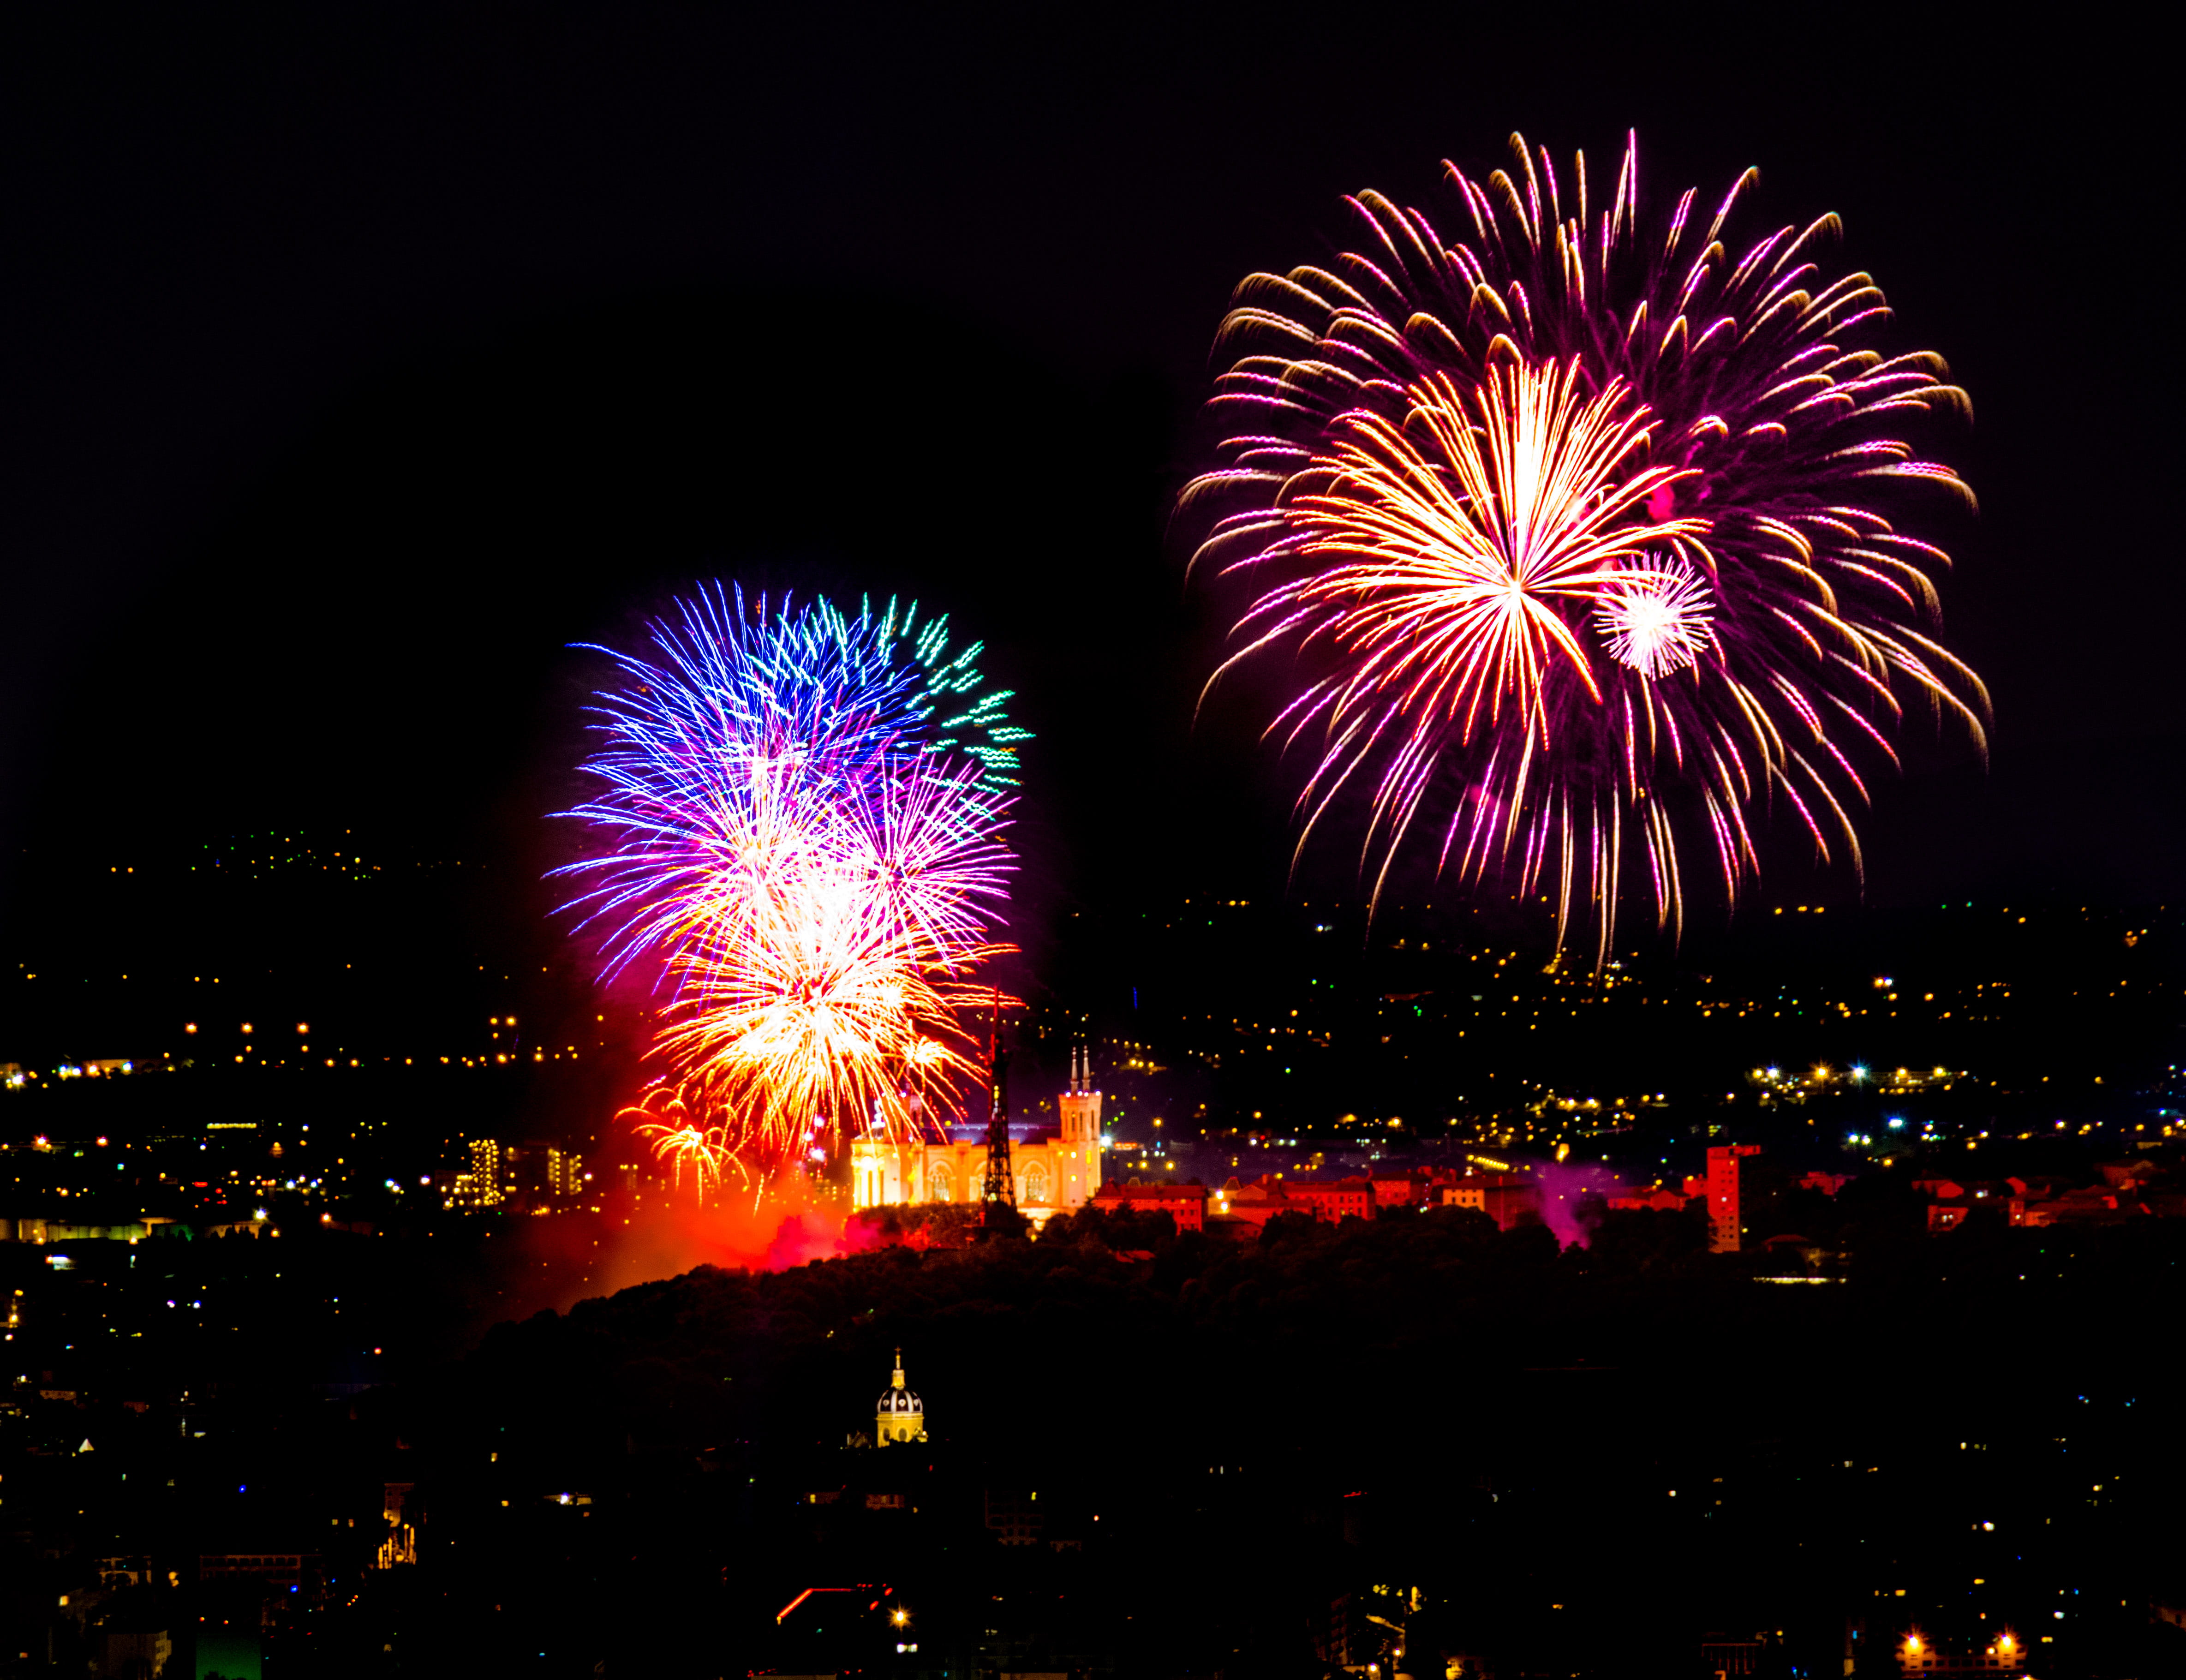 A colorful fireworks display at night in France., lyon, 14 juillet